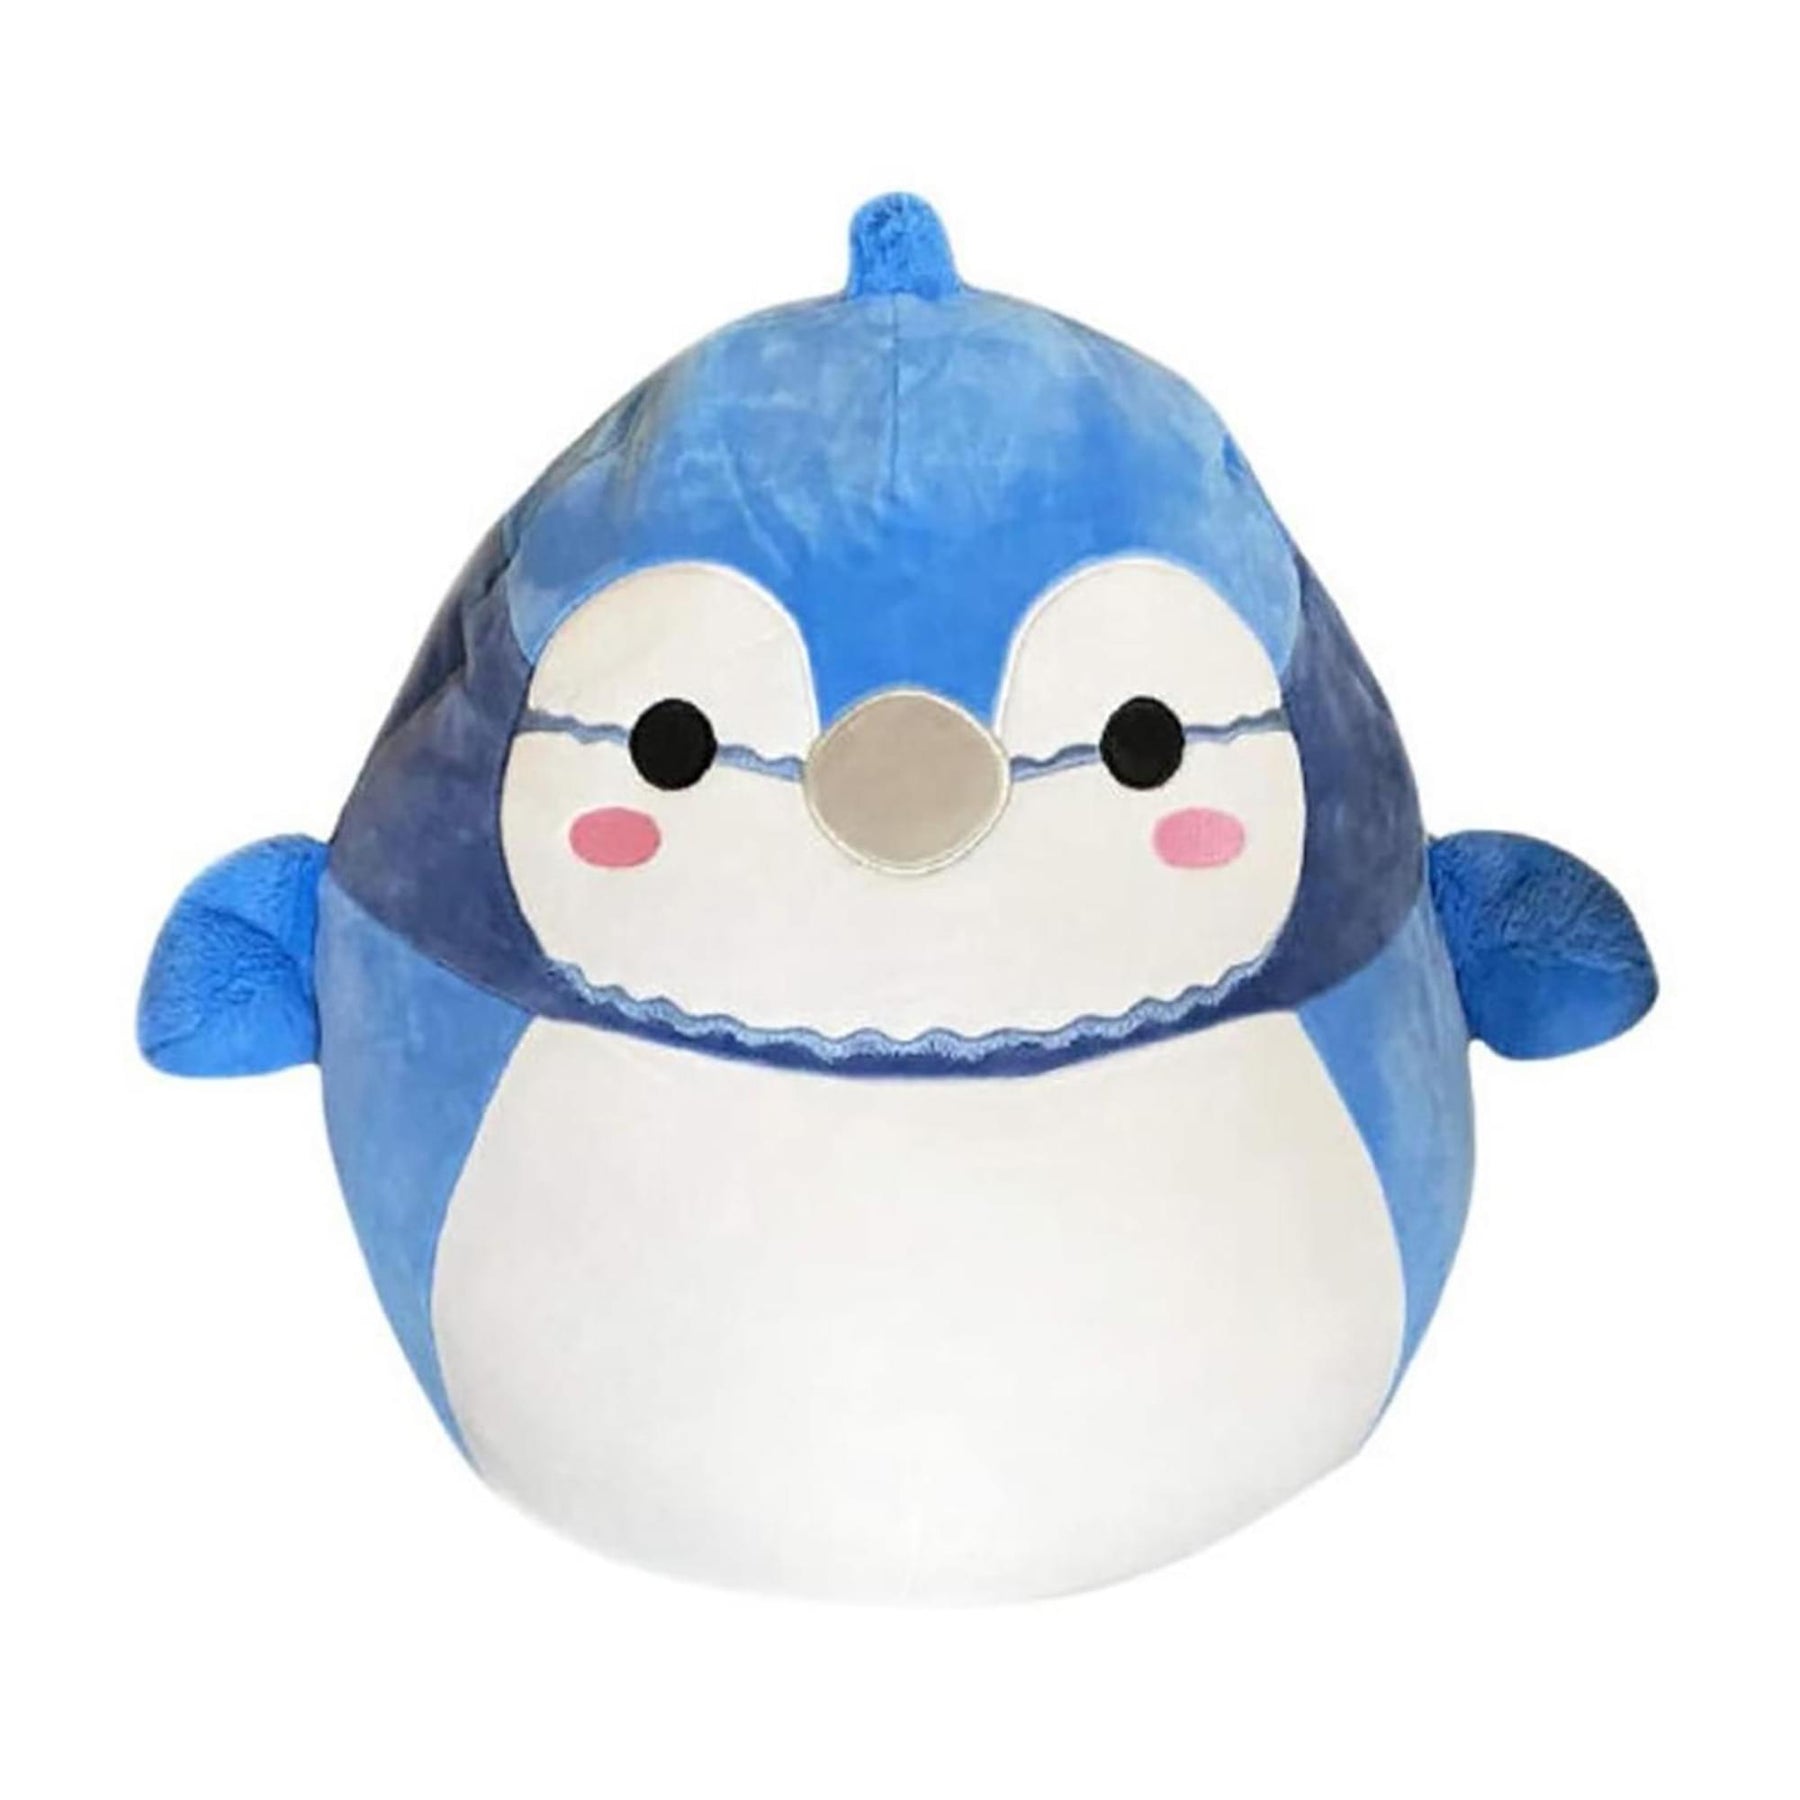 Squishmallow 12 Inch Plush | Babs the Blue Jay